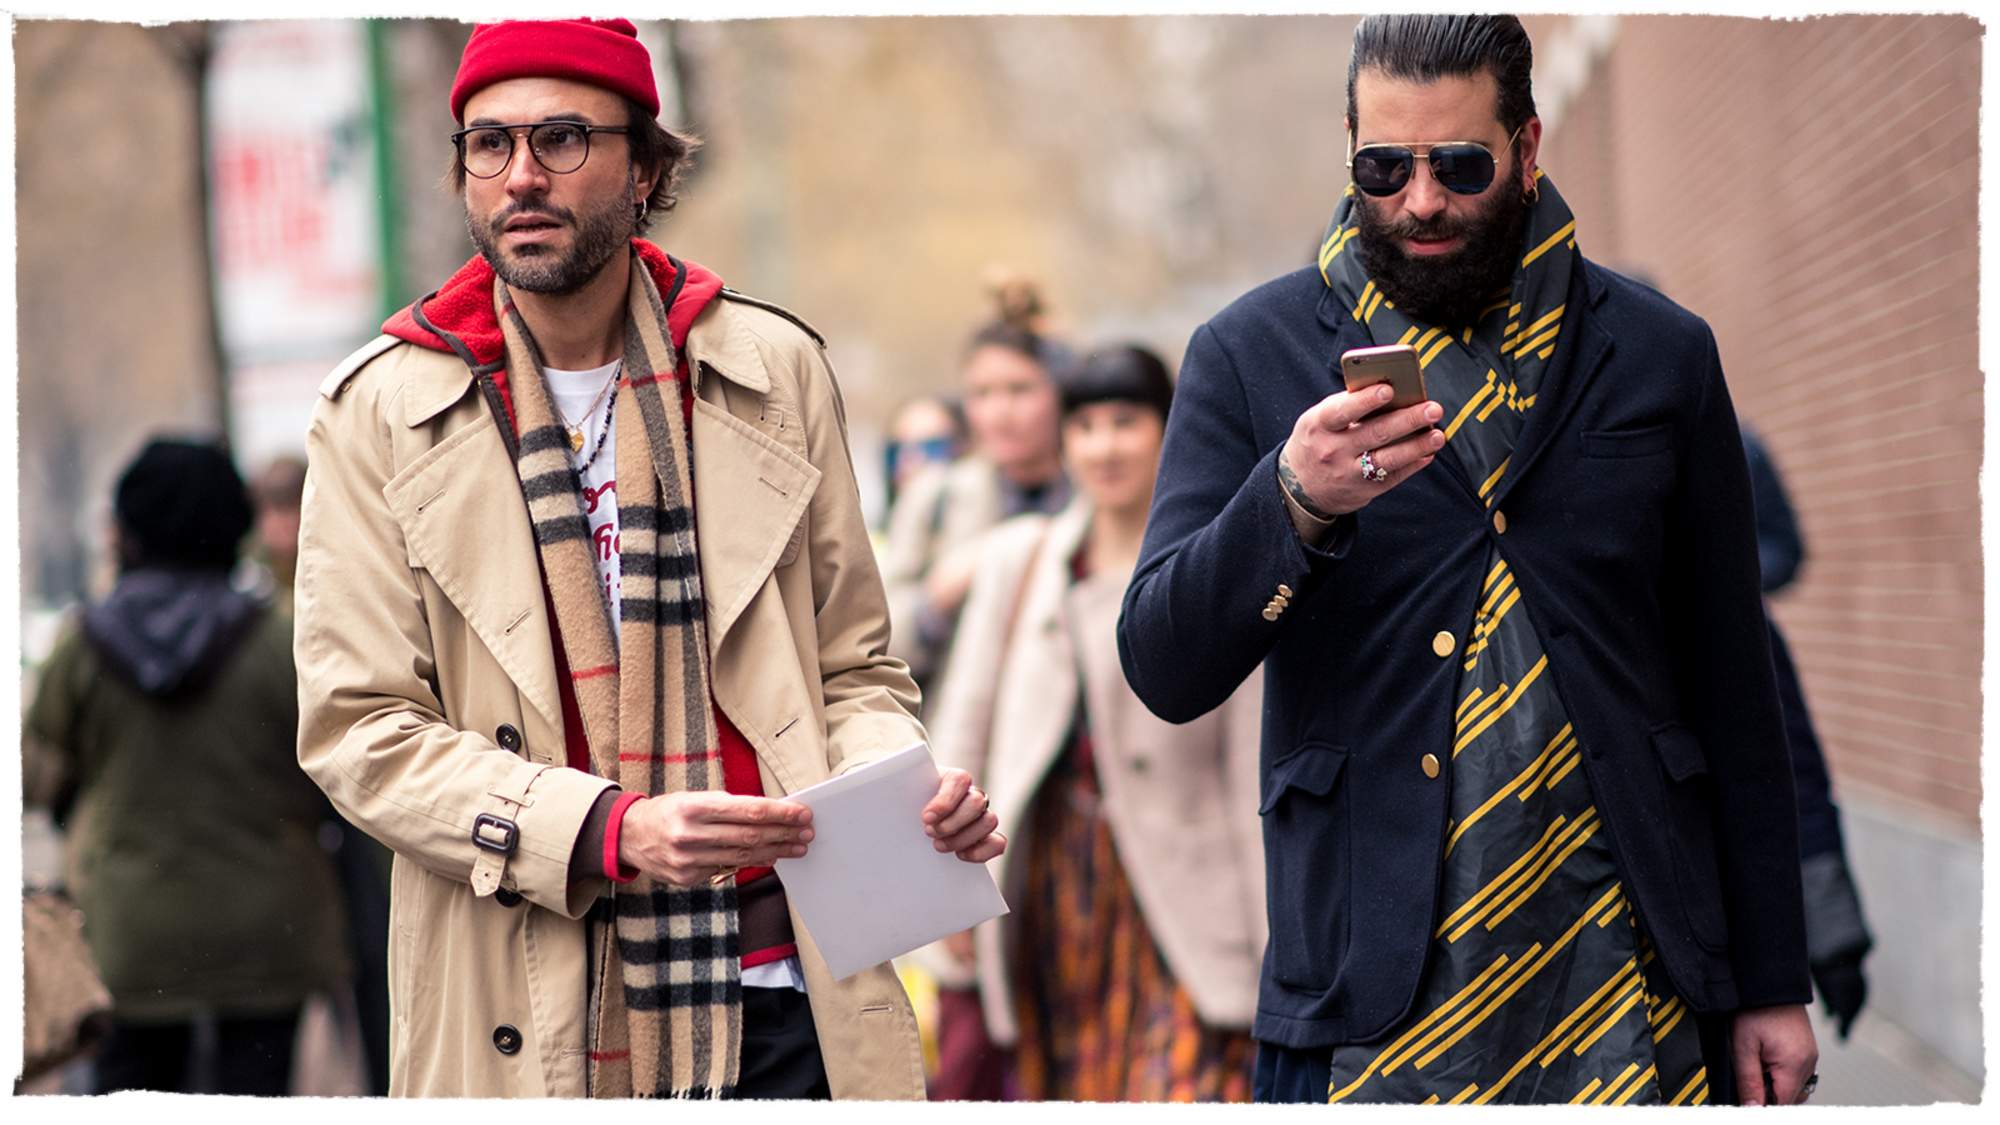 SEVEN WAYS TO WEAR YOUR SCARF IN STYLE